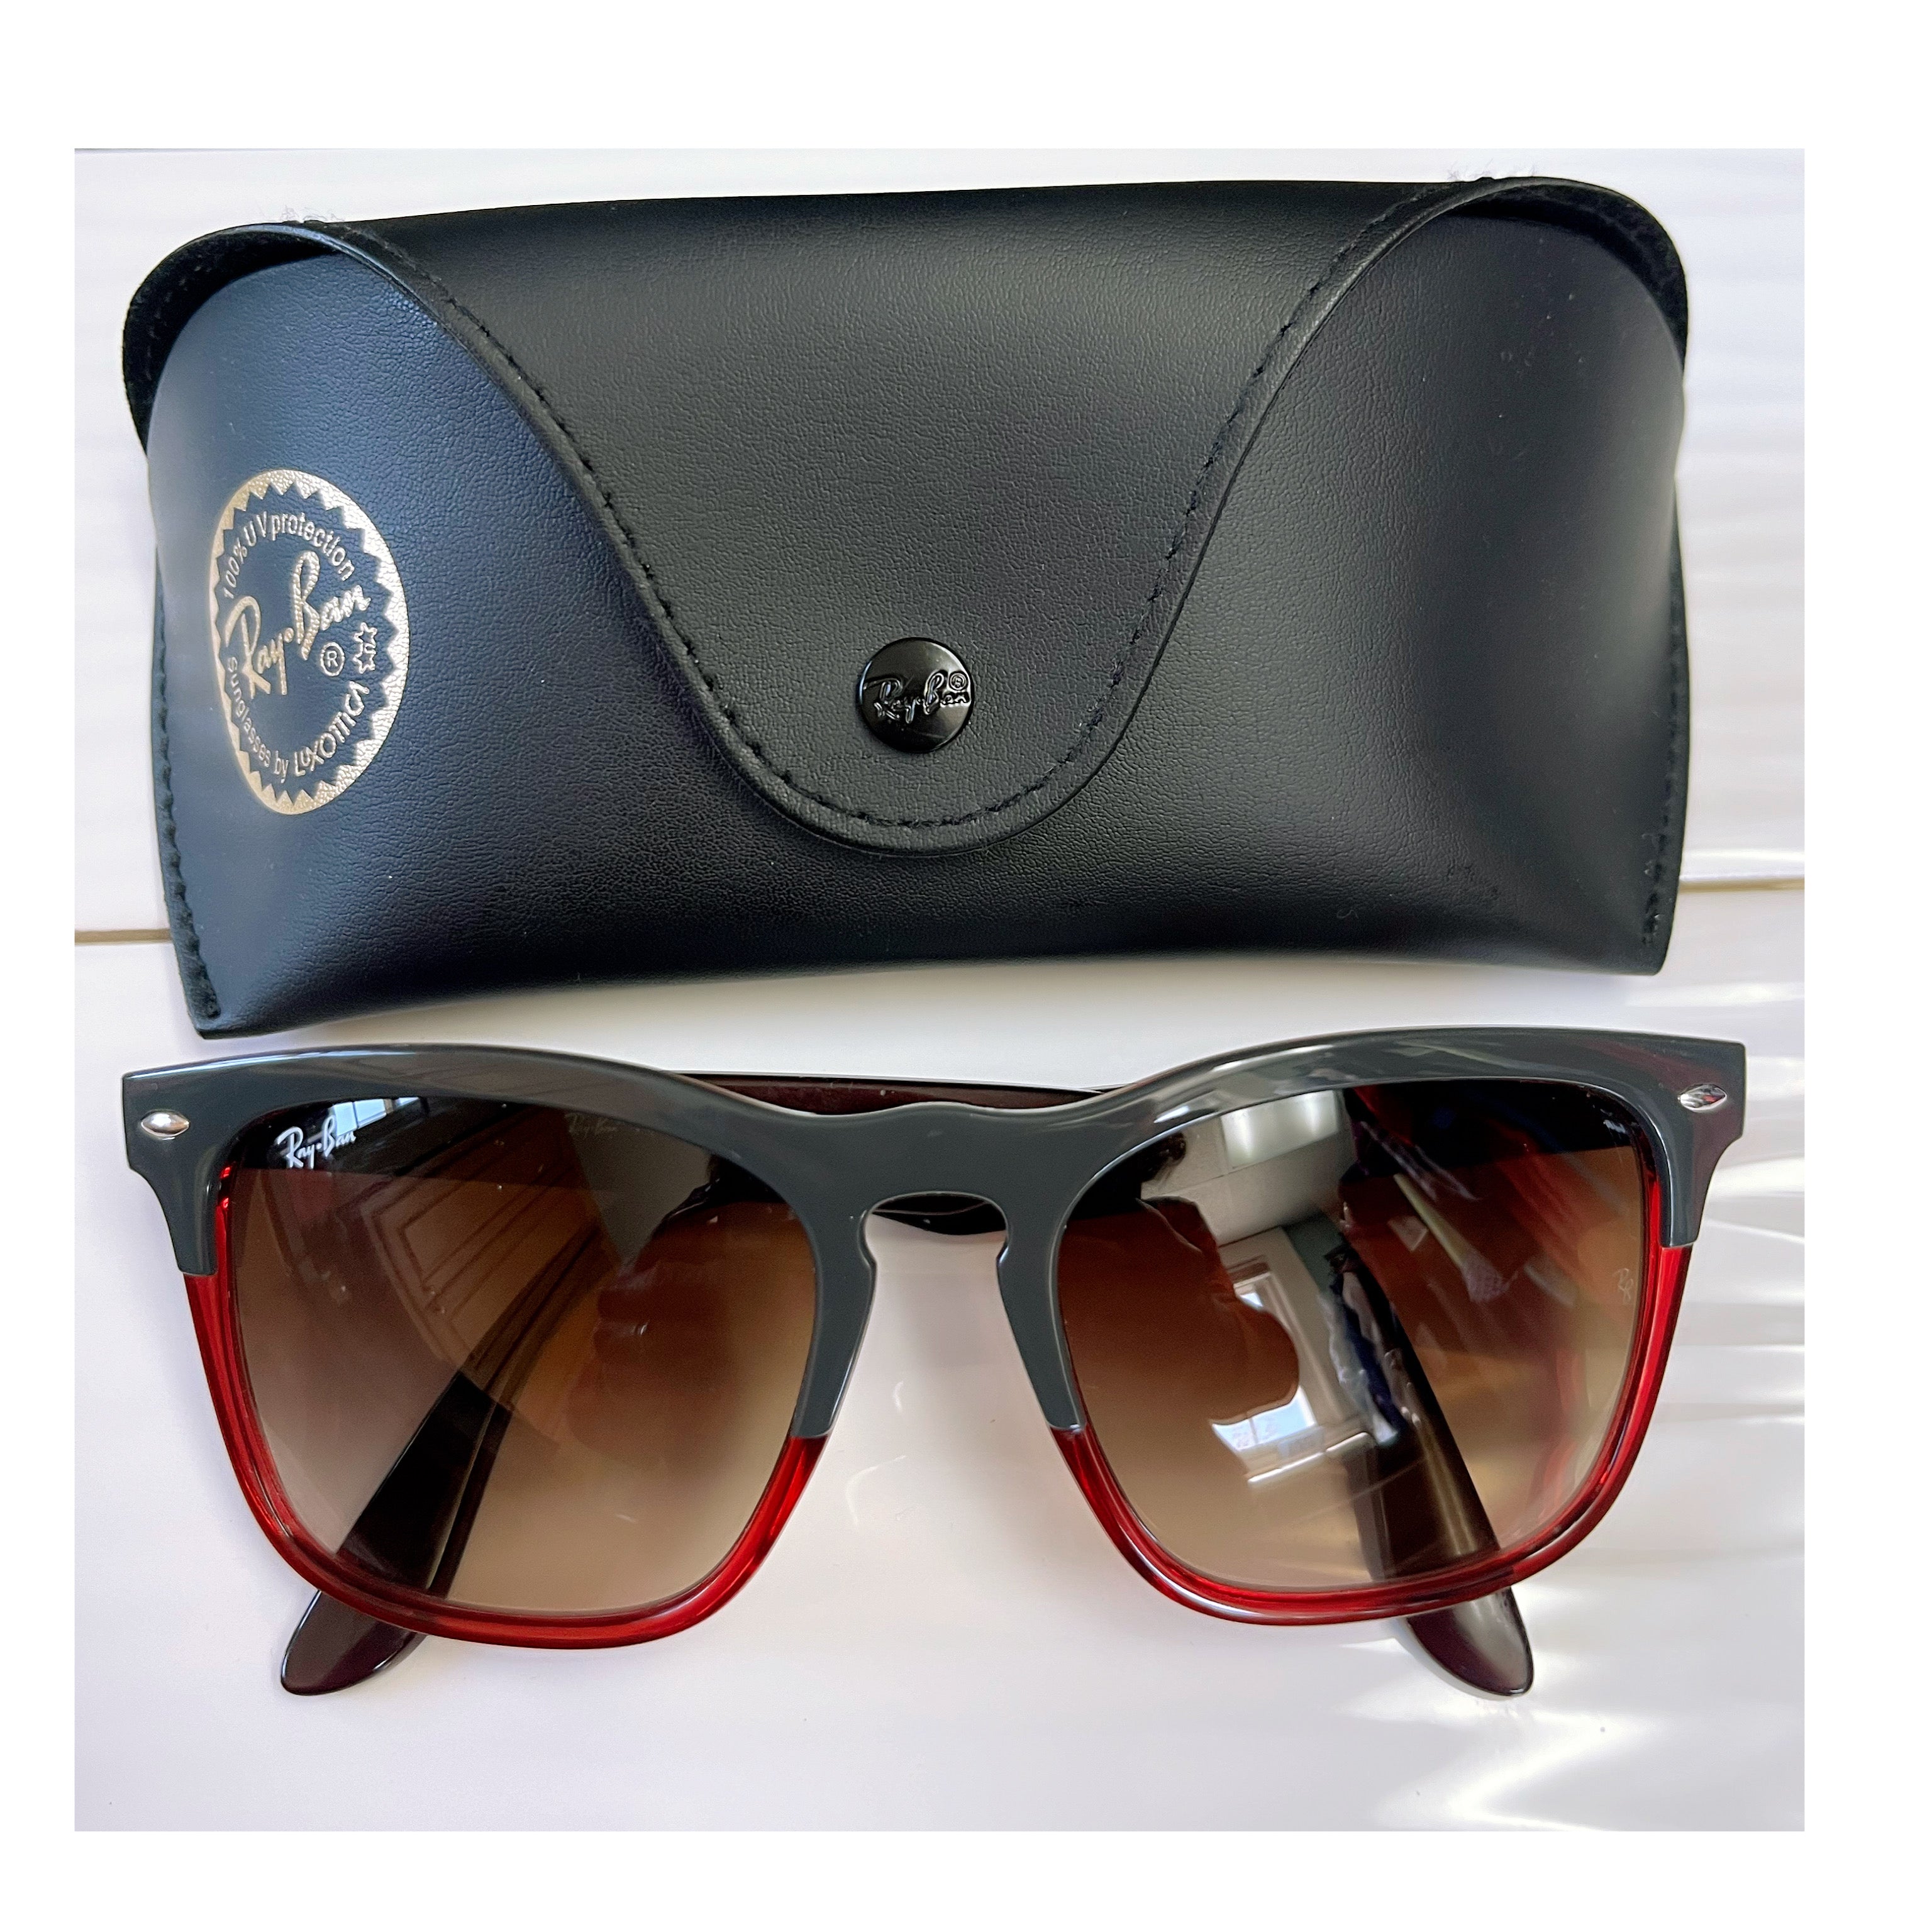 Ray Ban gray and red Steve 4487 sunglasses, NEW IN CASE!